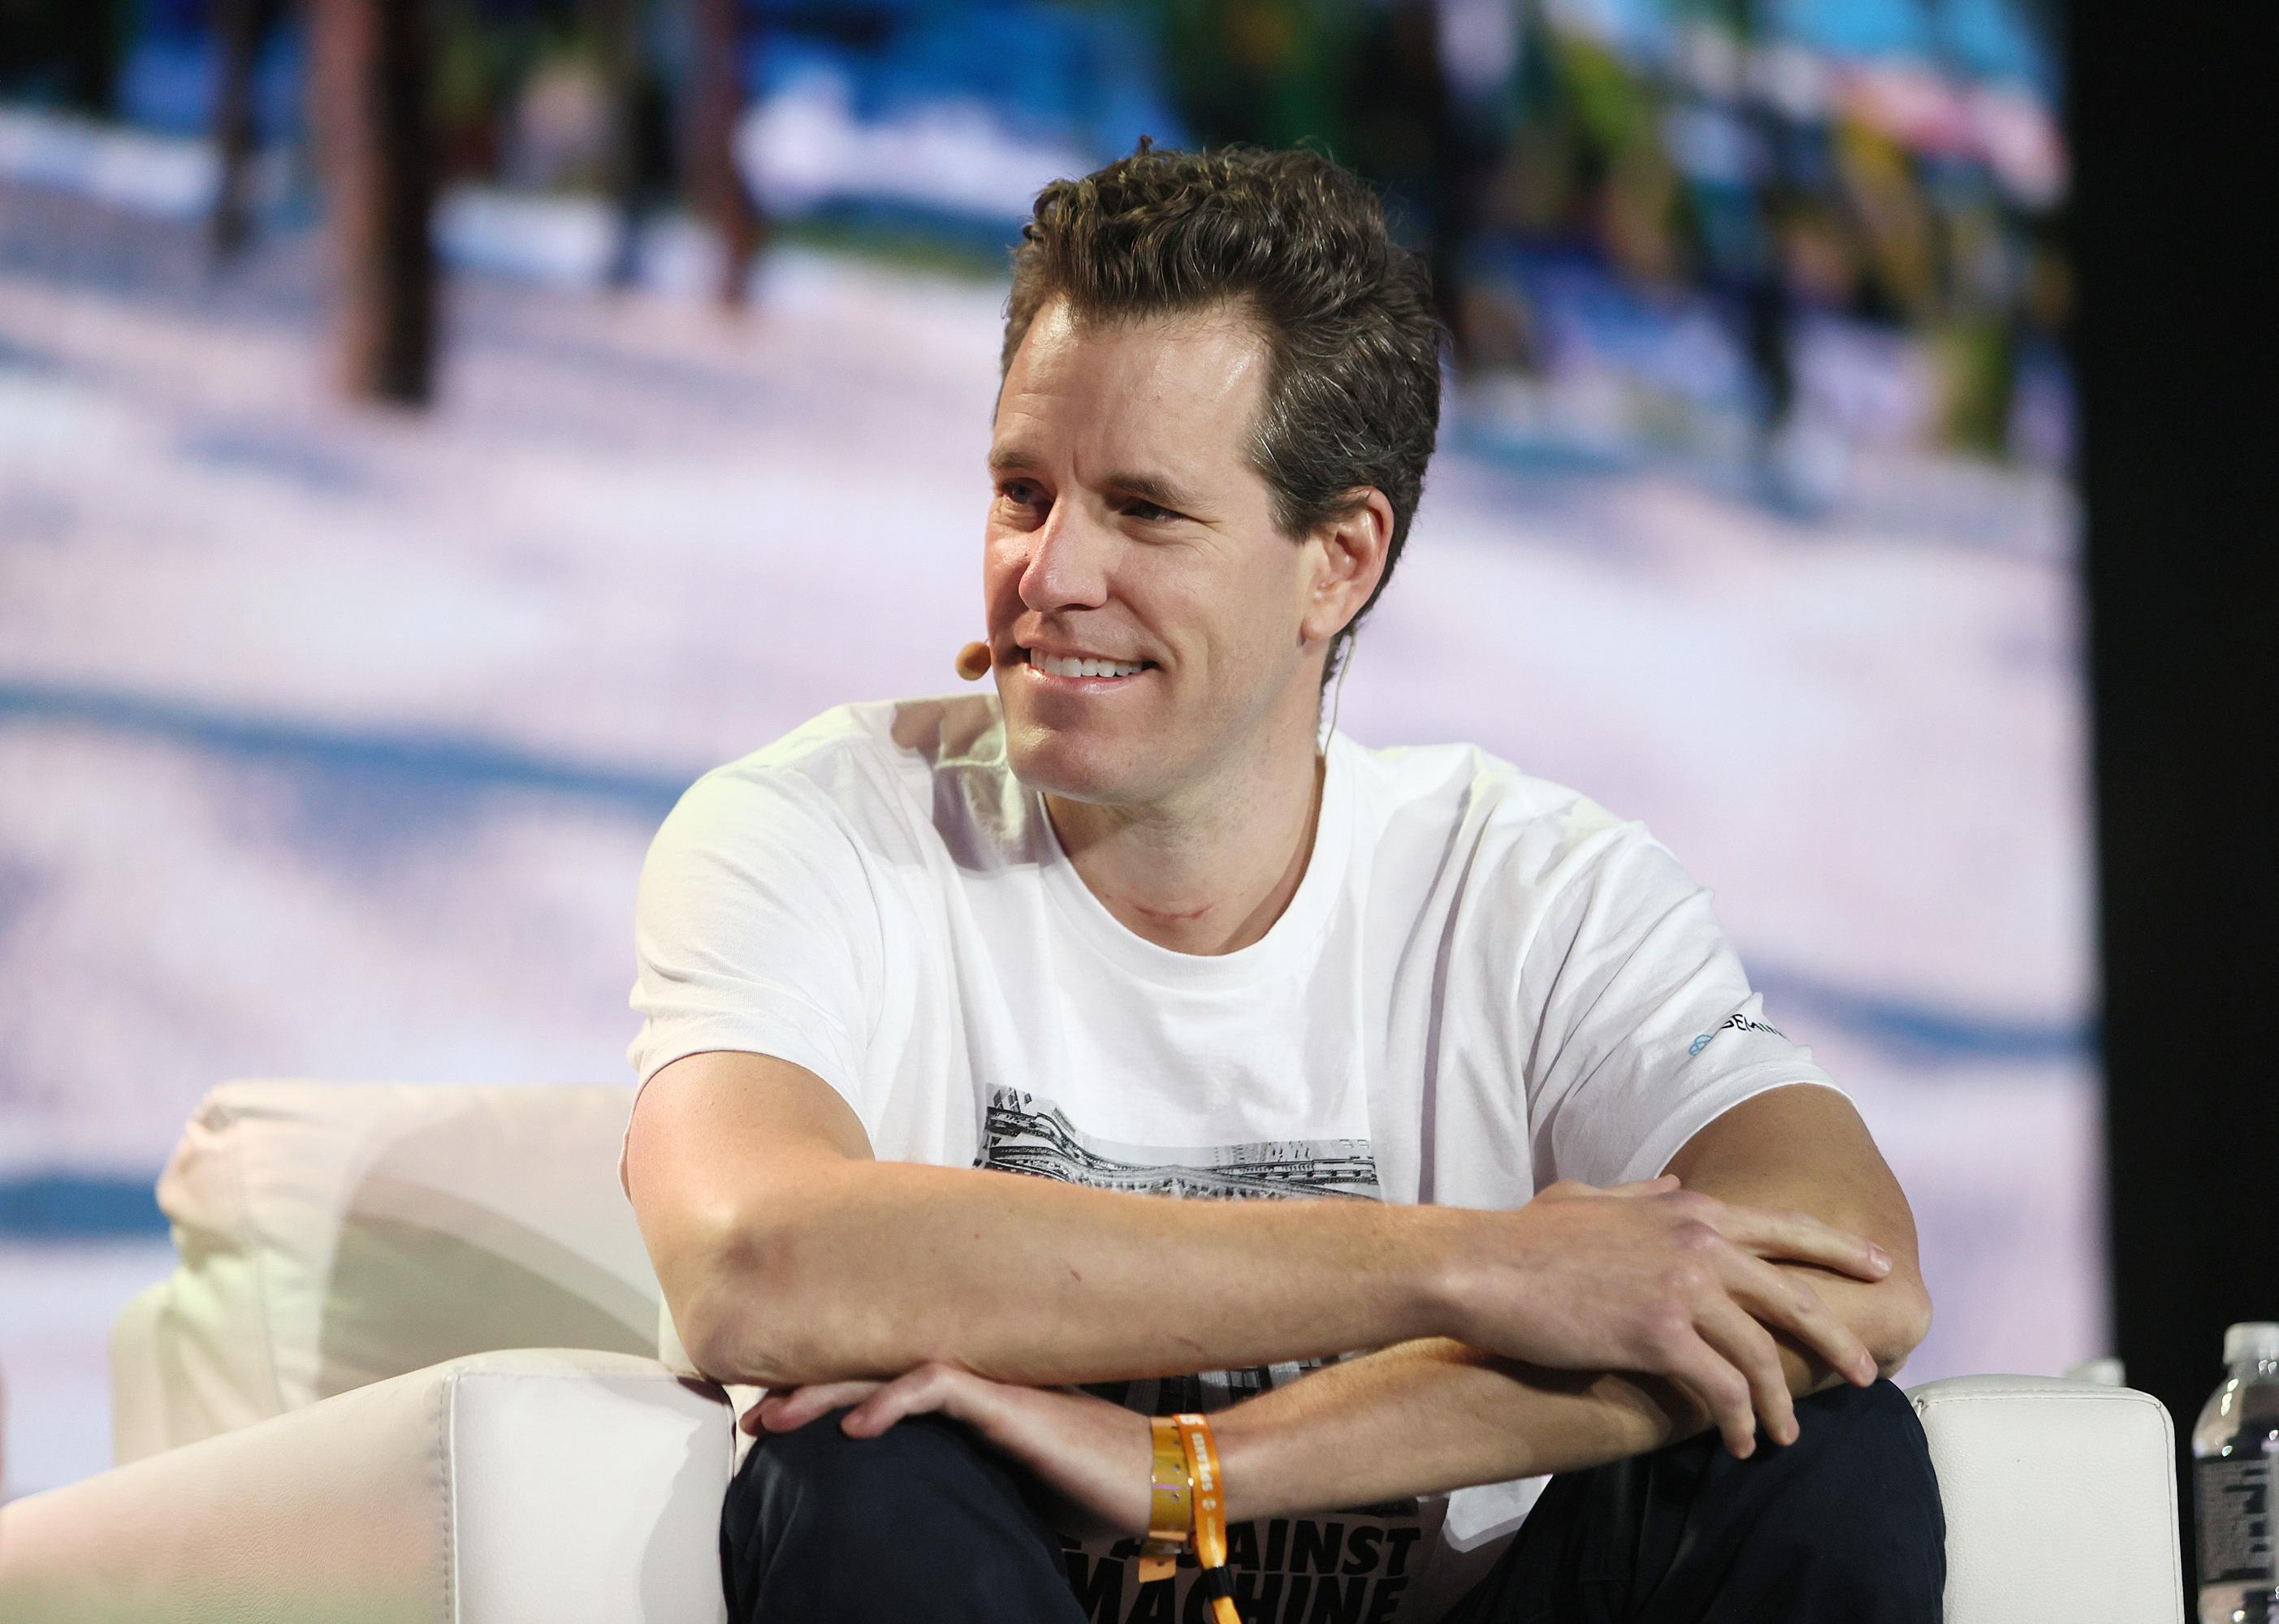 Cameron Winklevoss in a white t-shirt onstage.